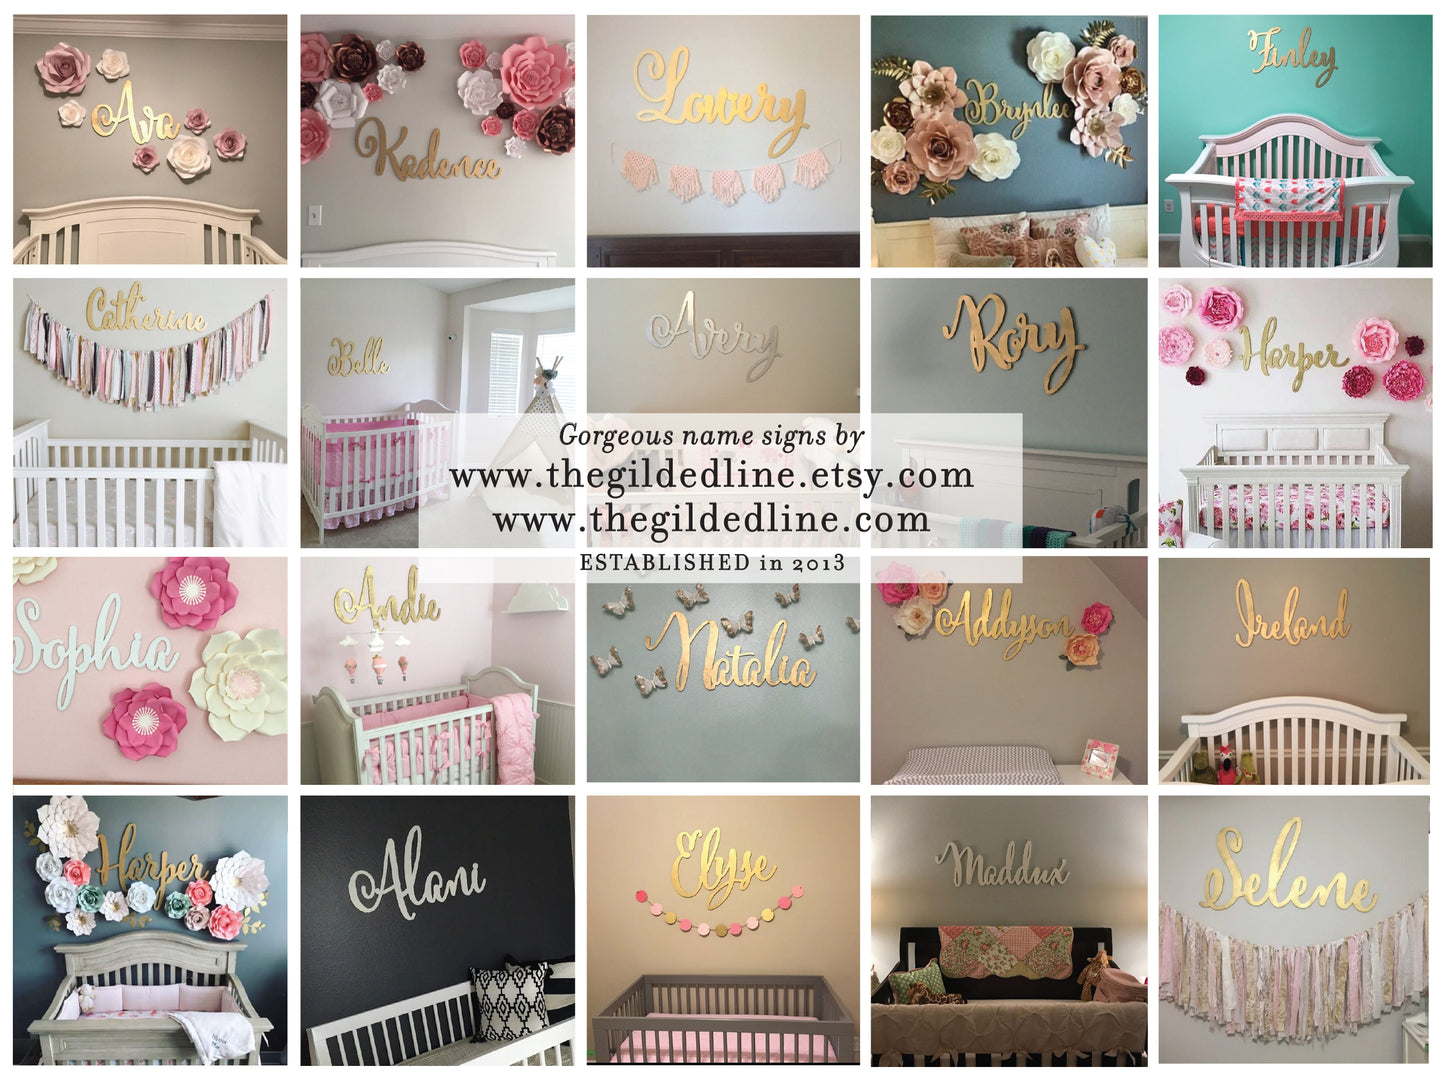 Large Laser Cut Calligraphy Name Sign for Kid's Wall or Nursery - thebestcaketoppers